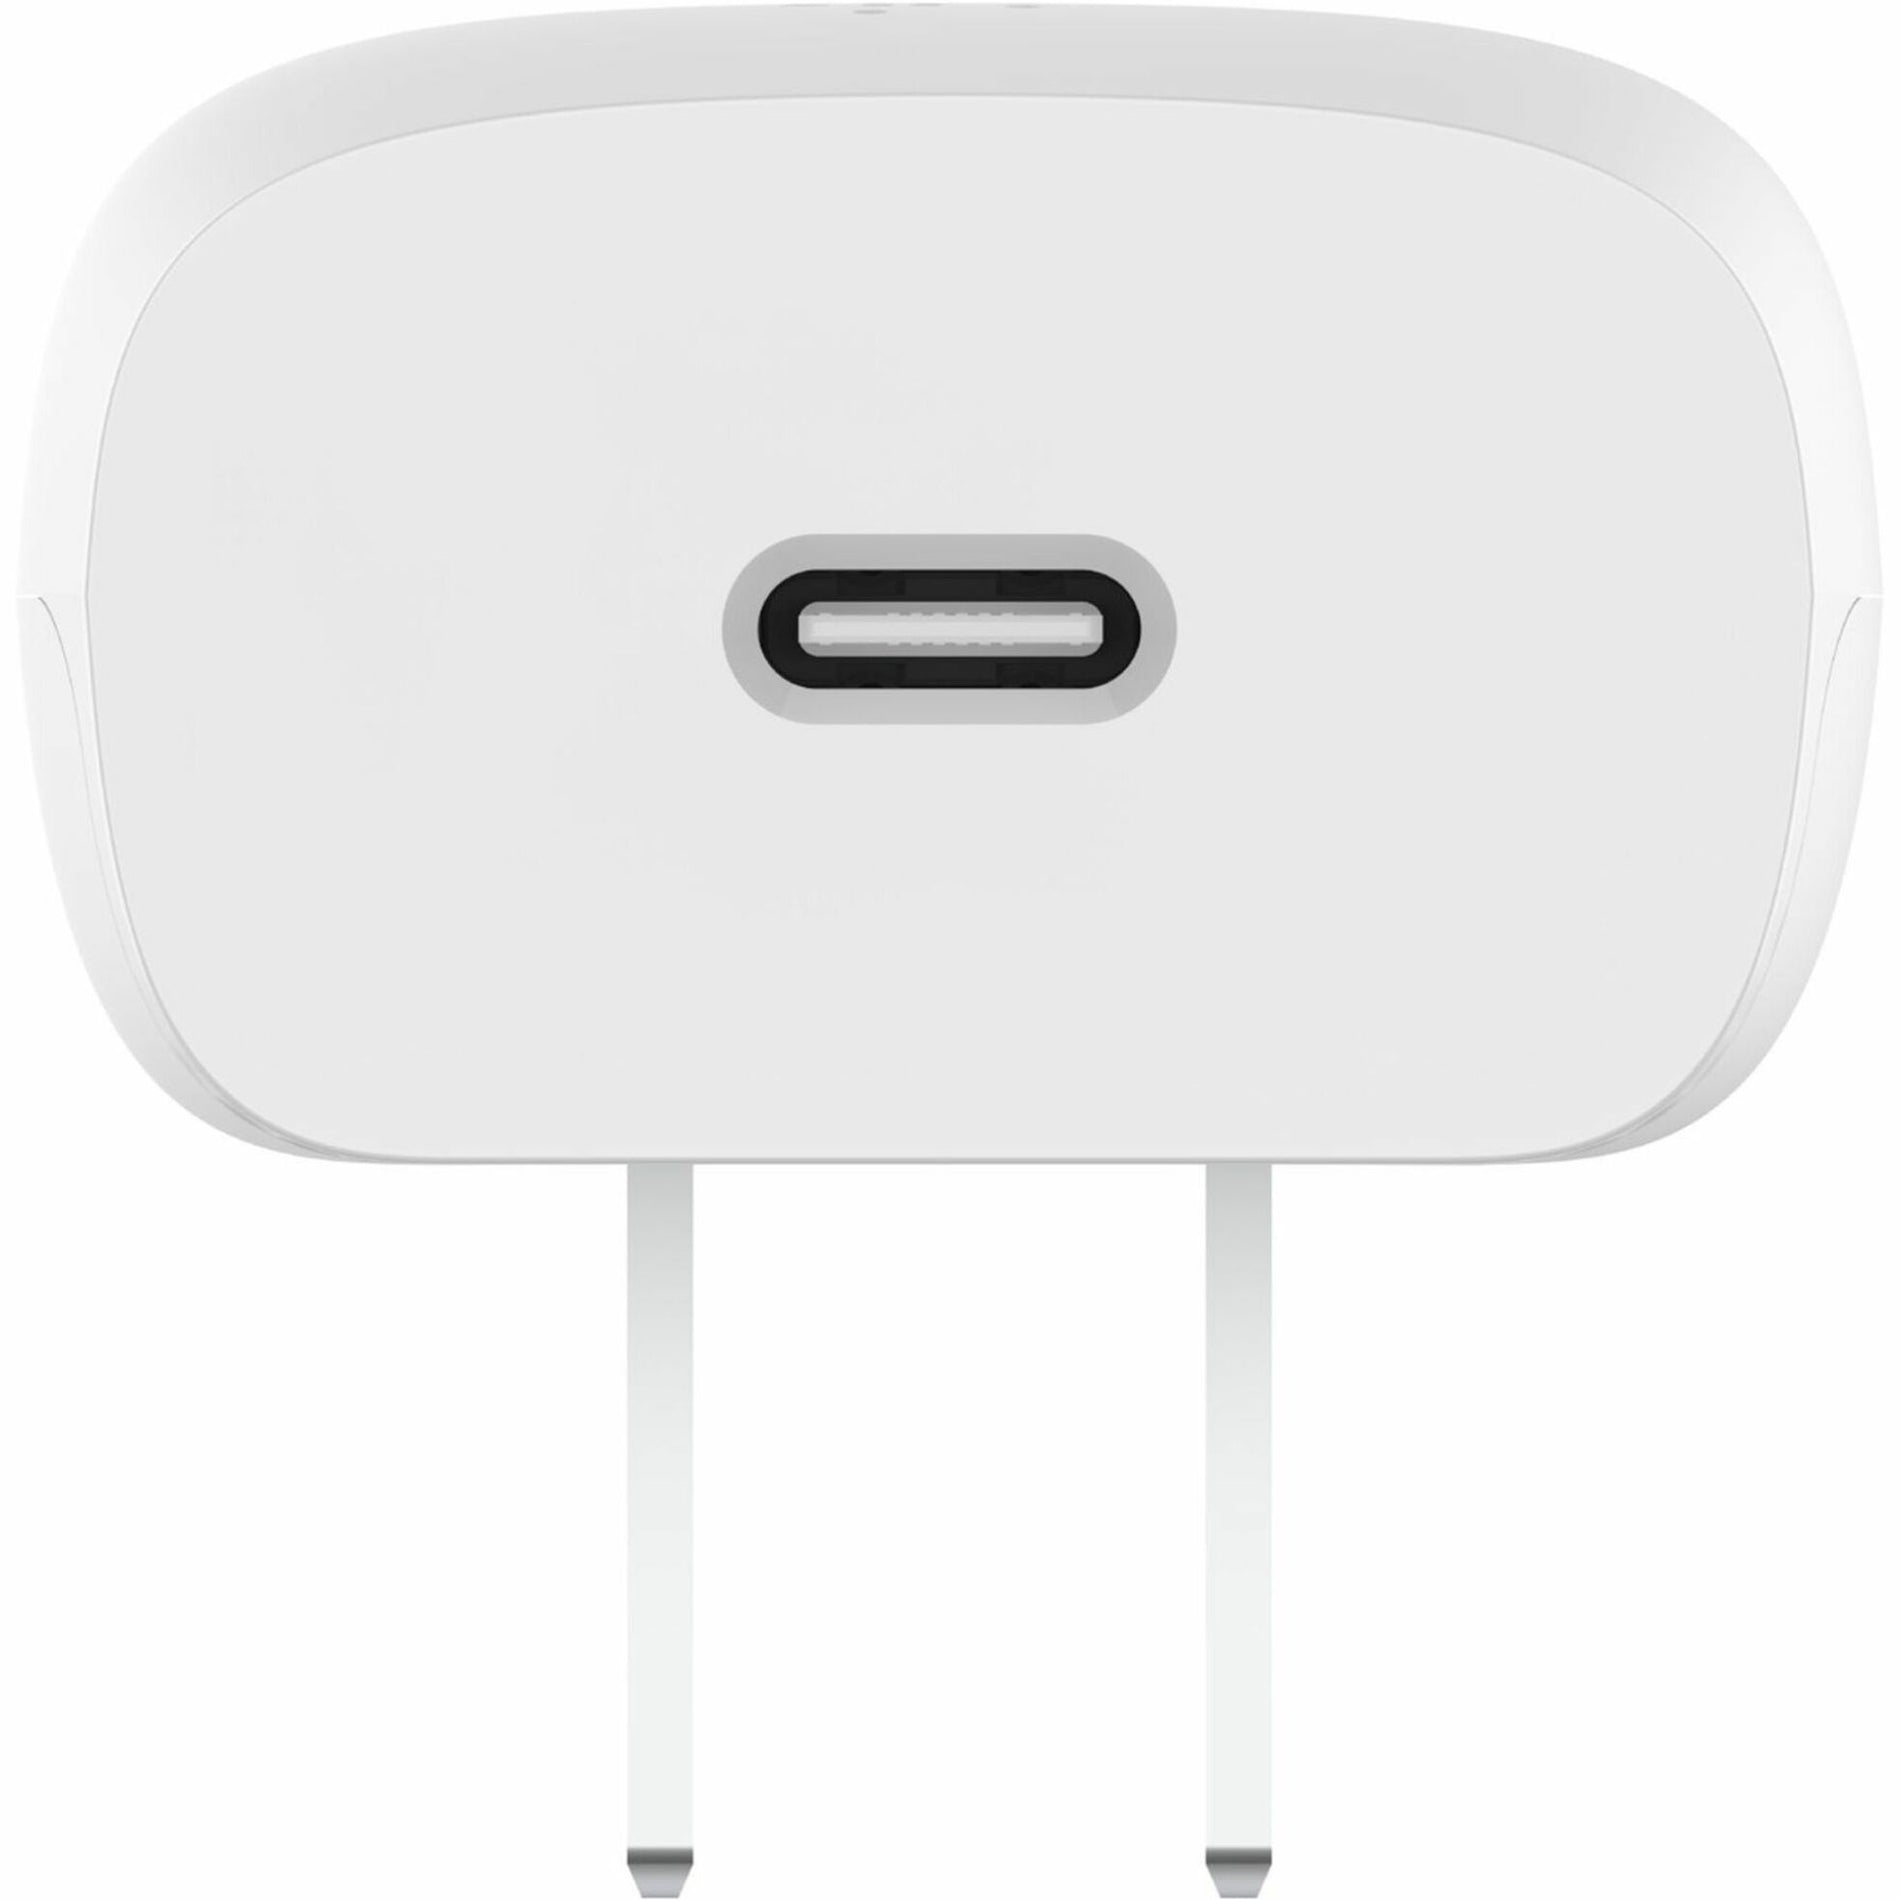 Belkin WCA006DQWH USB-C PPS Wall Charger, 20W Maximum Output Power